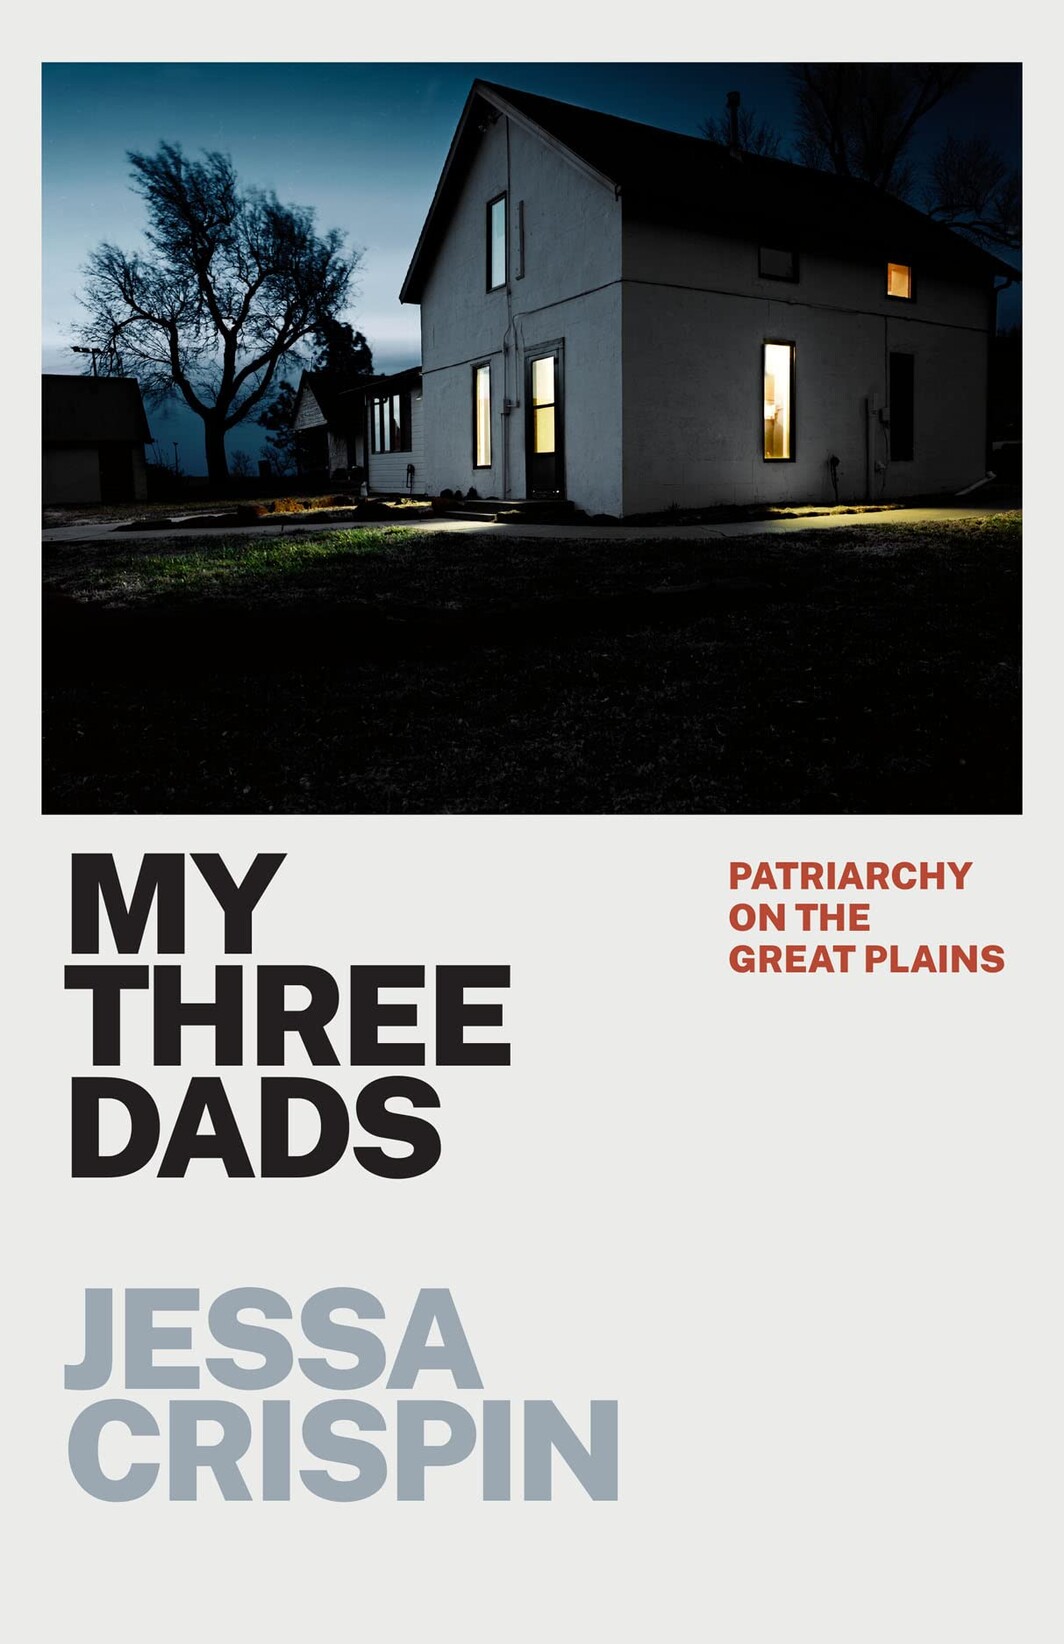 The cover of My Three Dads: Patriarchy on the Great Plains